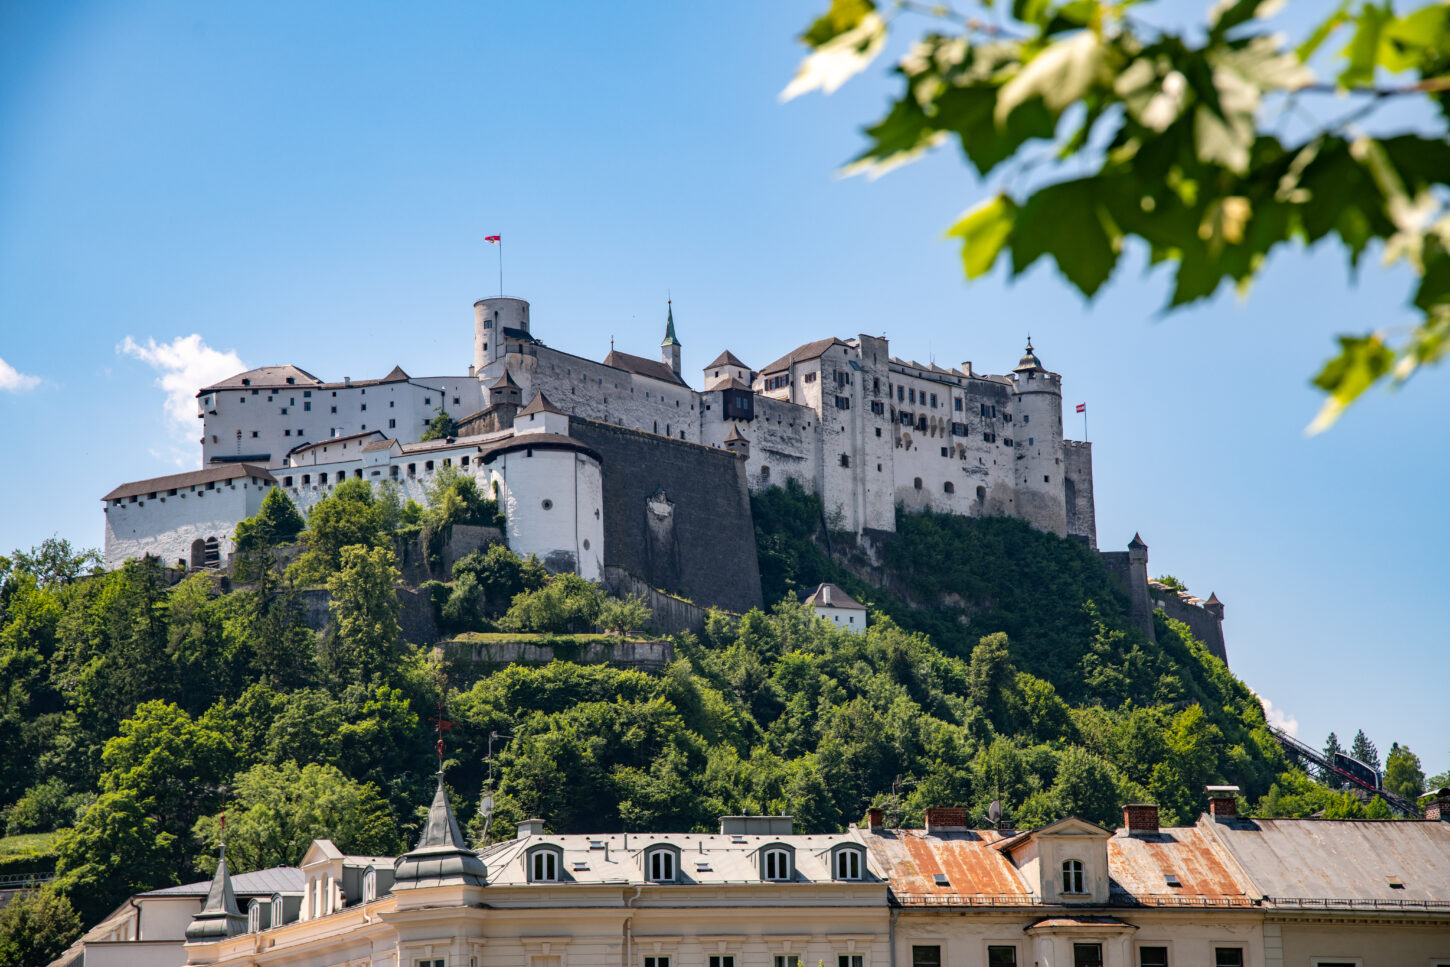 View of Hohensalzburg Fortress with houses and trees in the foreground under a graceful, large fortress against a blue sky with light clouds.